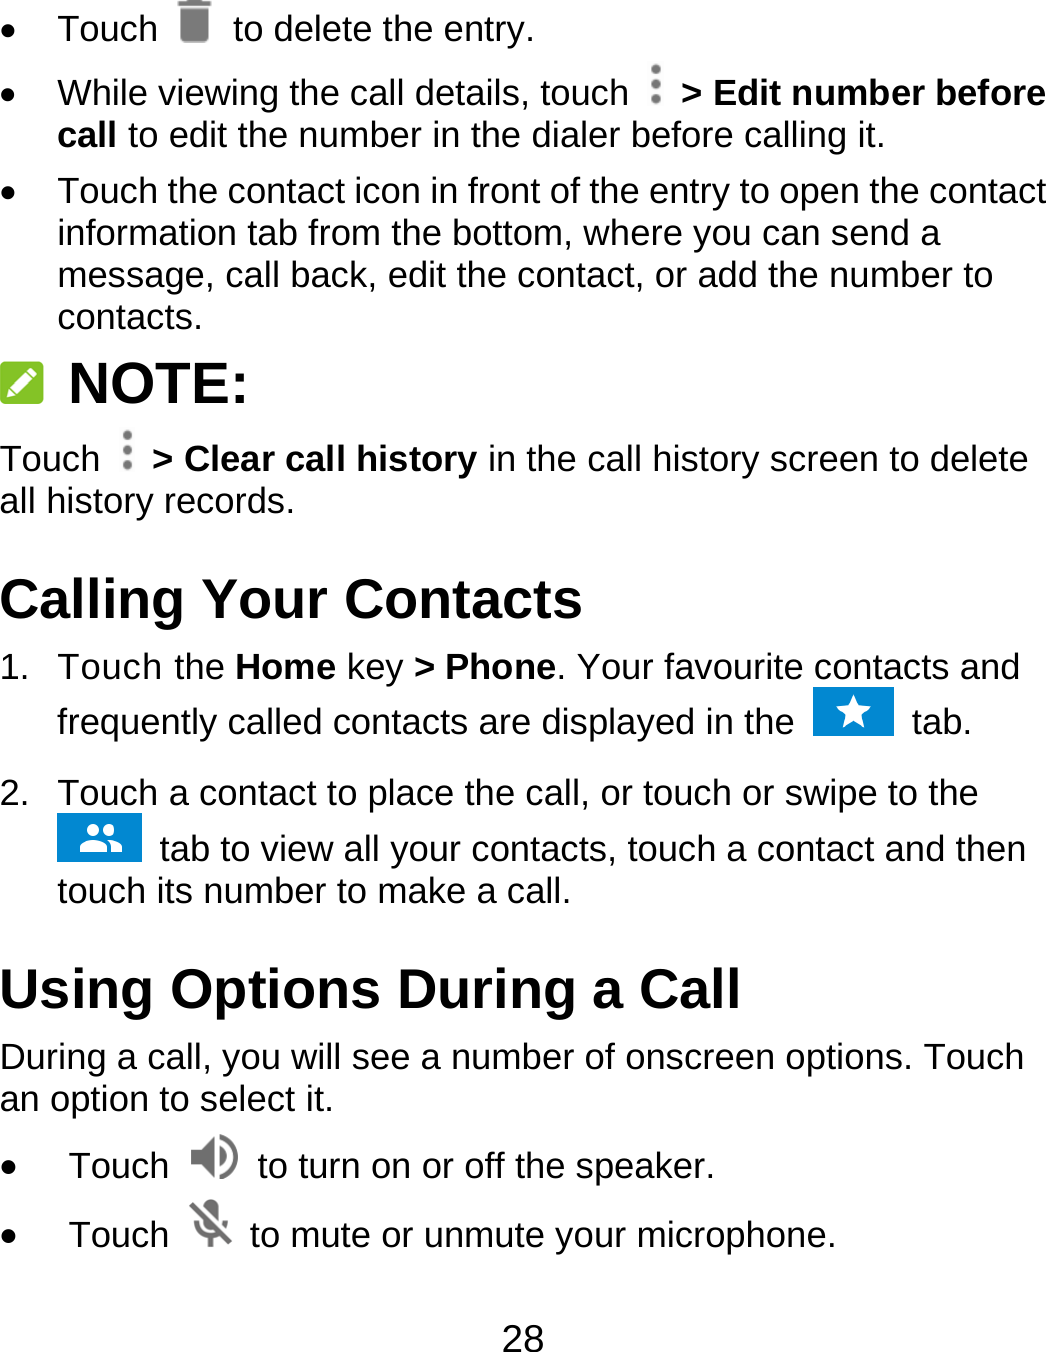 28  Touch   to delete the entry.   While viewing the call details, touch    &gt; Edit number before call to edit the number in the dialer before calling it.   Touch the contact icon in front of the entry to open the contact information tab from the bottom, where you can send a message, call back, edit the contact, or add the number to contacts.  NOTE: Touch   &gt; Clear call history in the call history screen to delete all history records. Calling Your Contacts 1. Touch the Home key &gt; Phone. Your favourite contacts and frequently called contacts are displayed in the   tab. 2.  Touch a contact to place the call, or touch or swipe to the  tab to view all your contacts, touch a contact and then touch its number to make a call. Using Options During a Call During a call, you will see a number of onscreen options. Touch an option to select it.  Touch    to turn on or off the speaker.  Touch    to mute or unmute your microphone. 